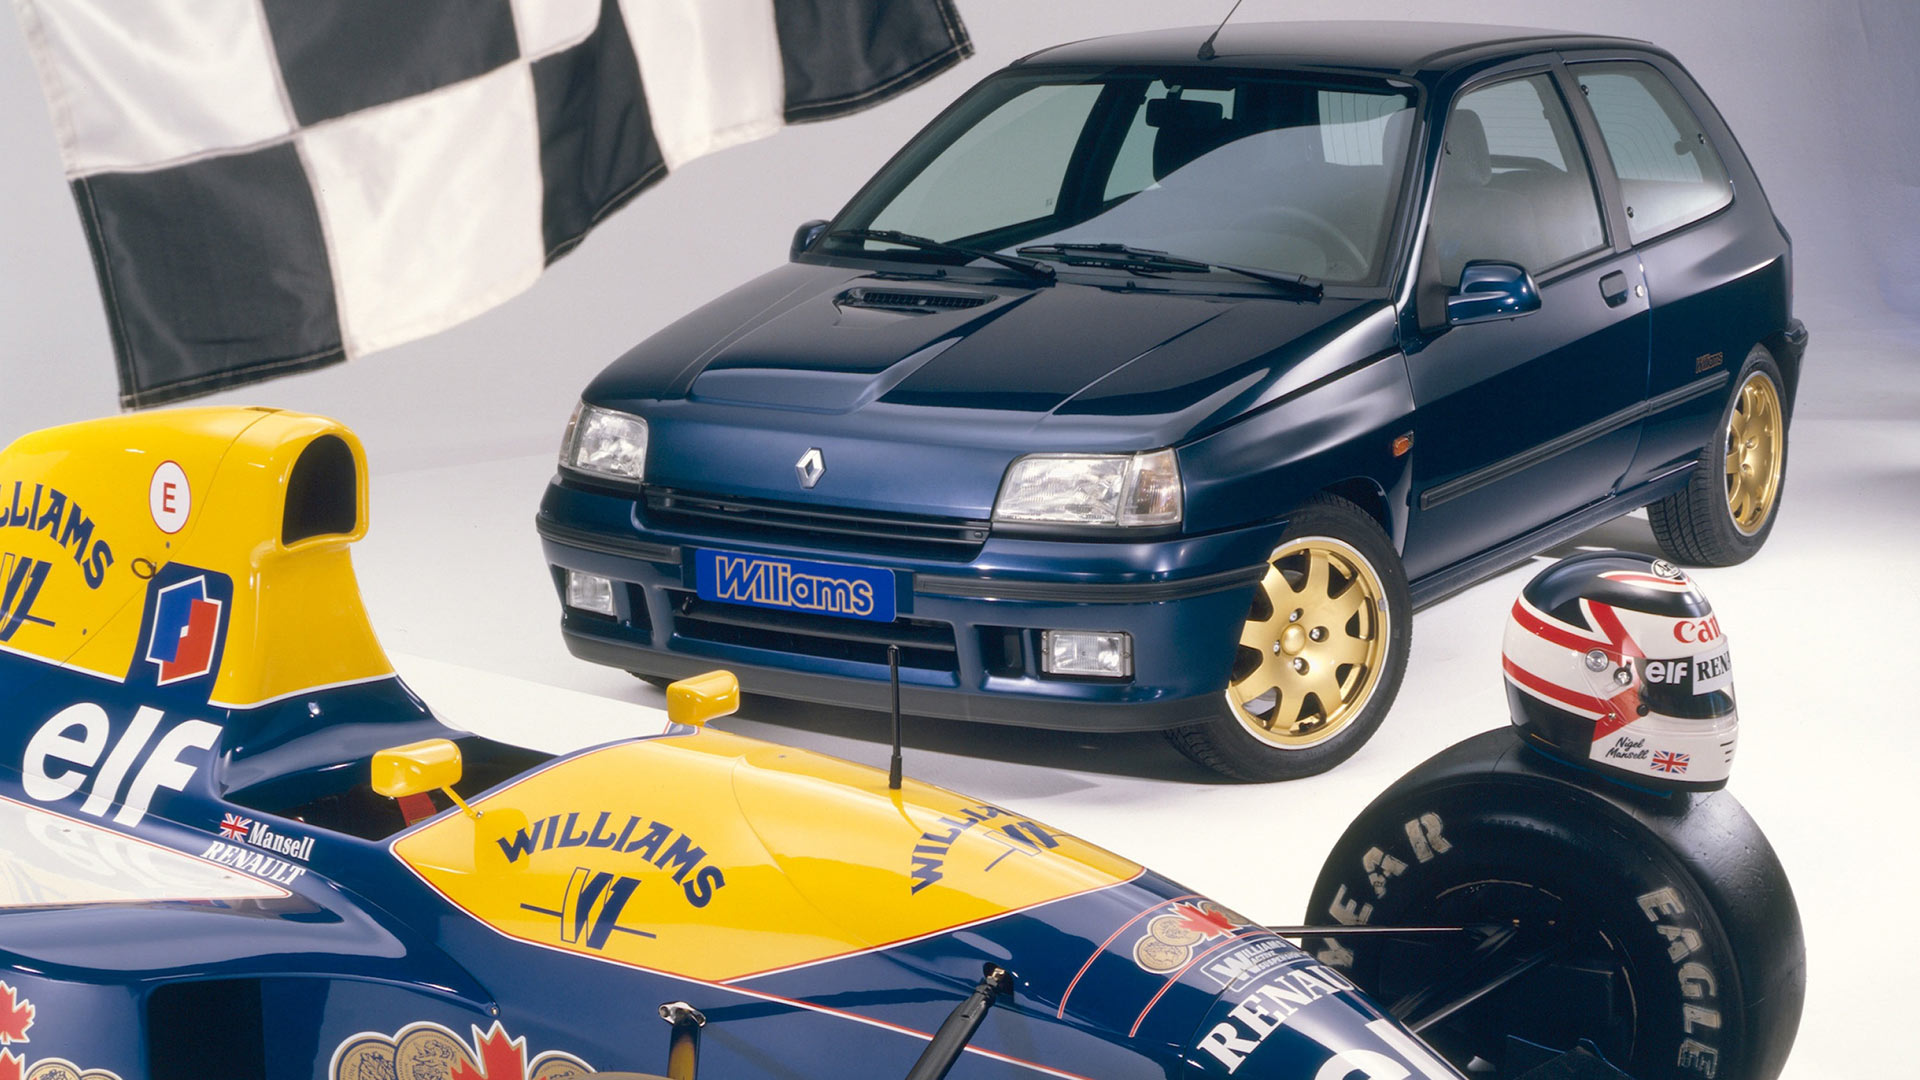 F1 dominance leads to the Renault Clio Williams